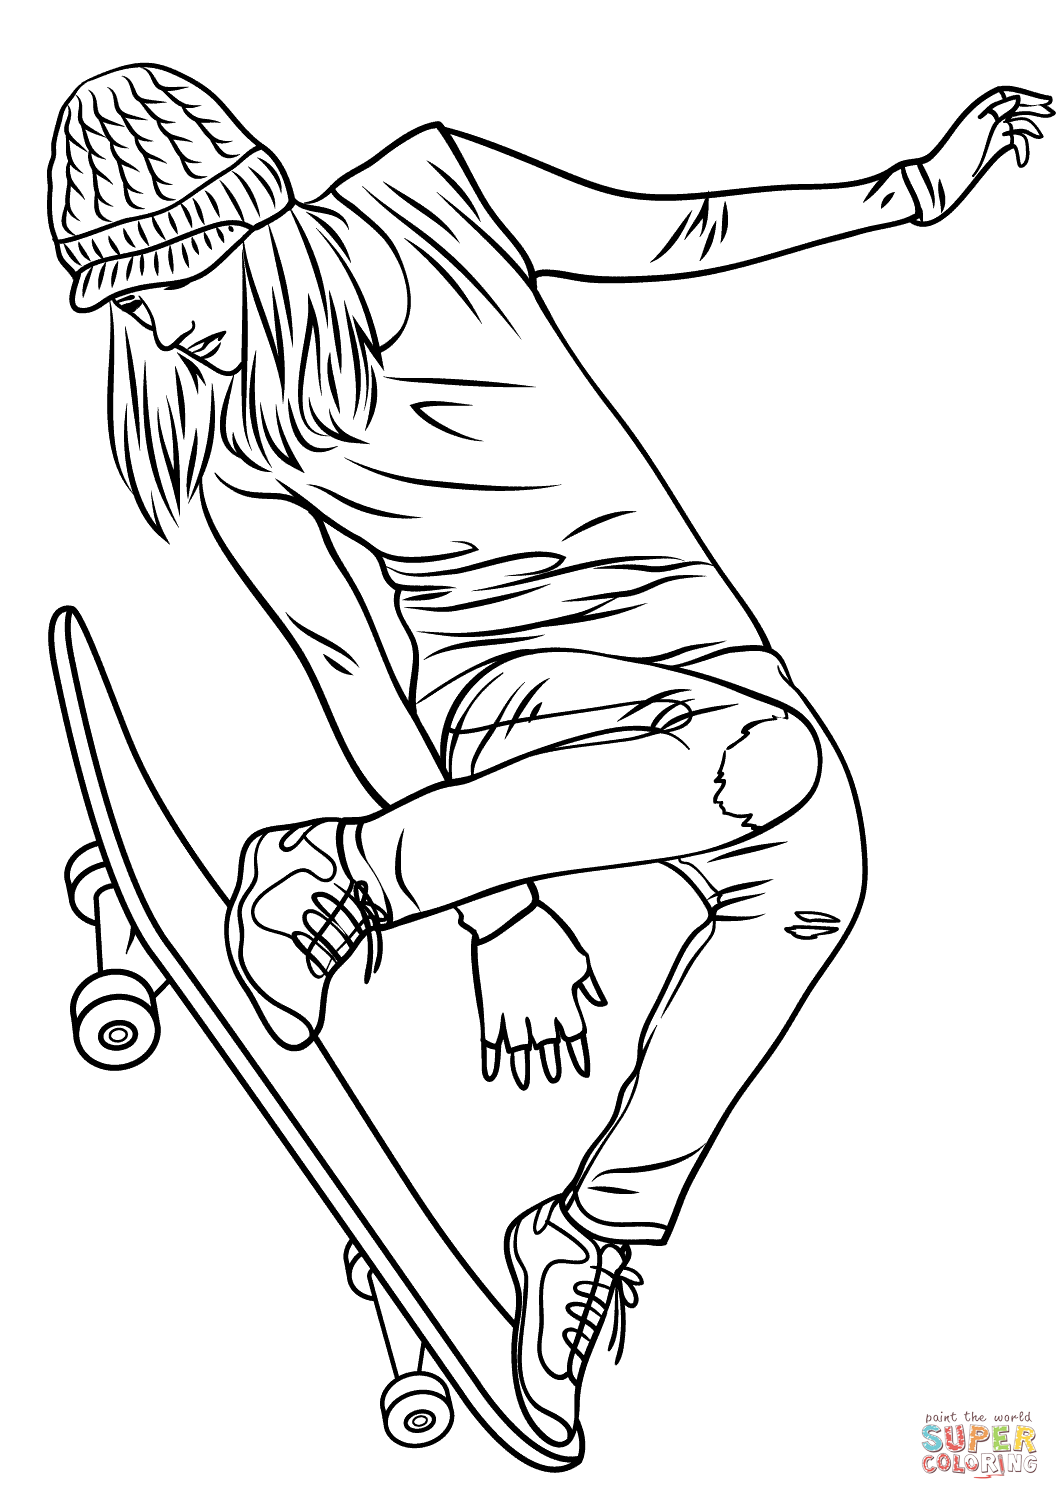 Girl Skateboarding coloring page | Free Printable Coloring Pages